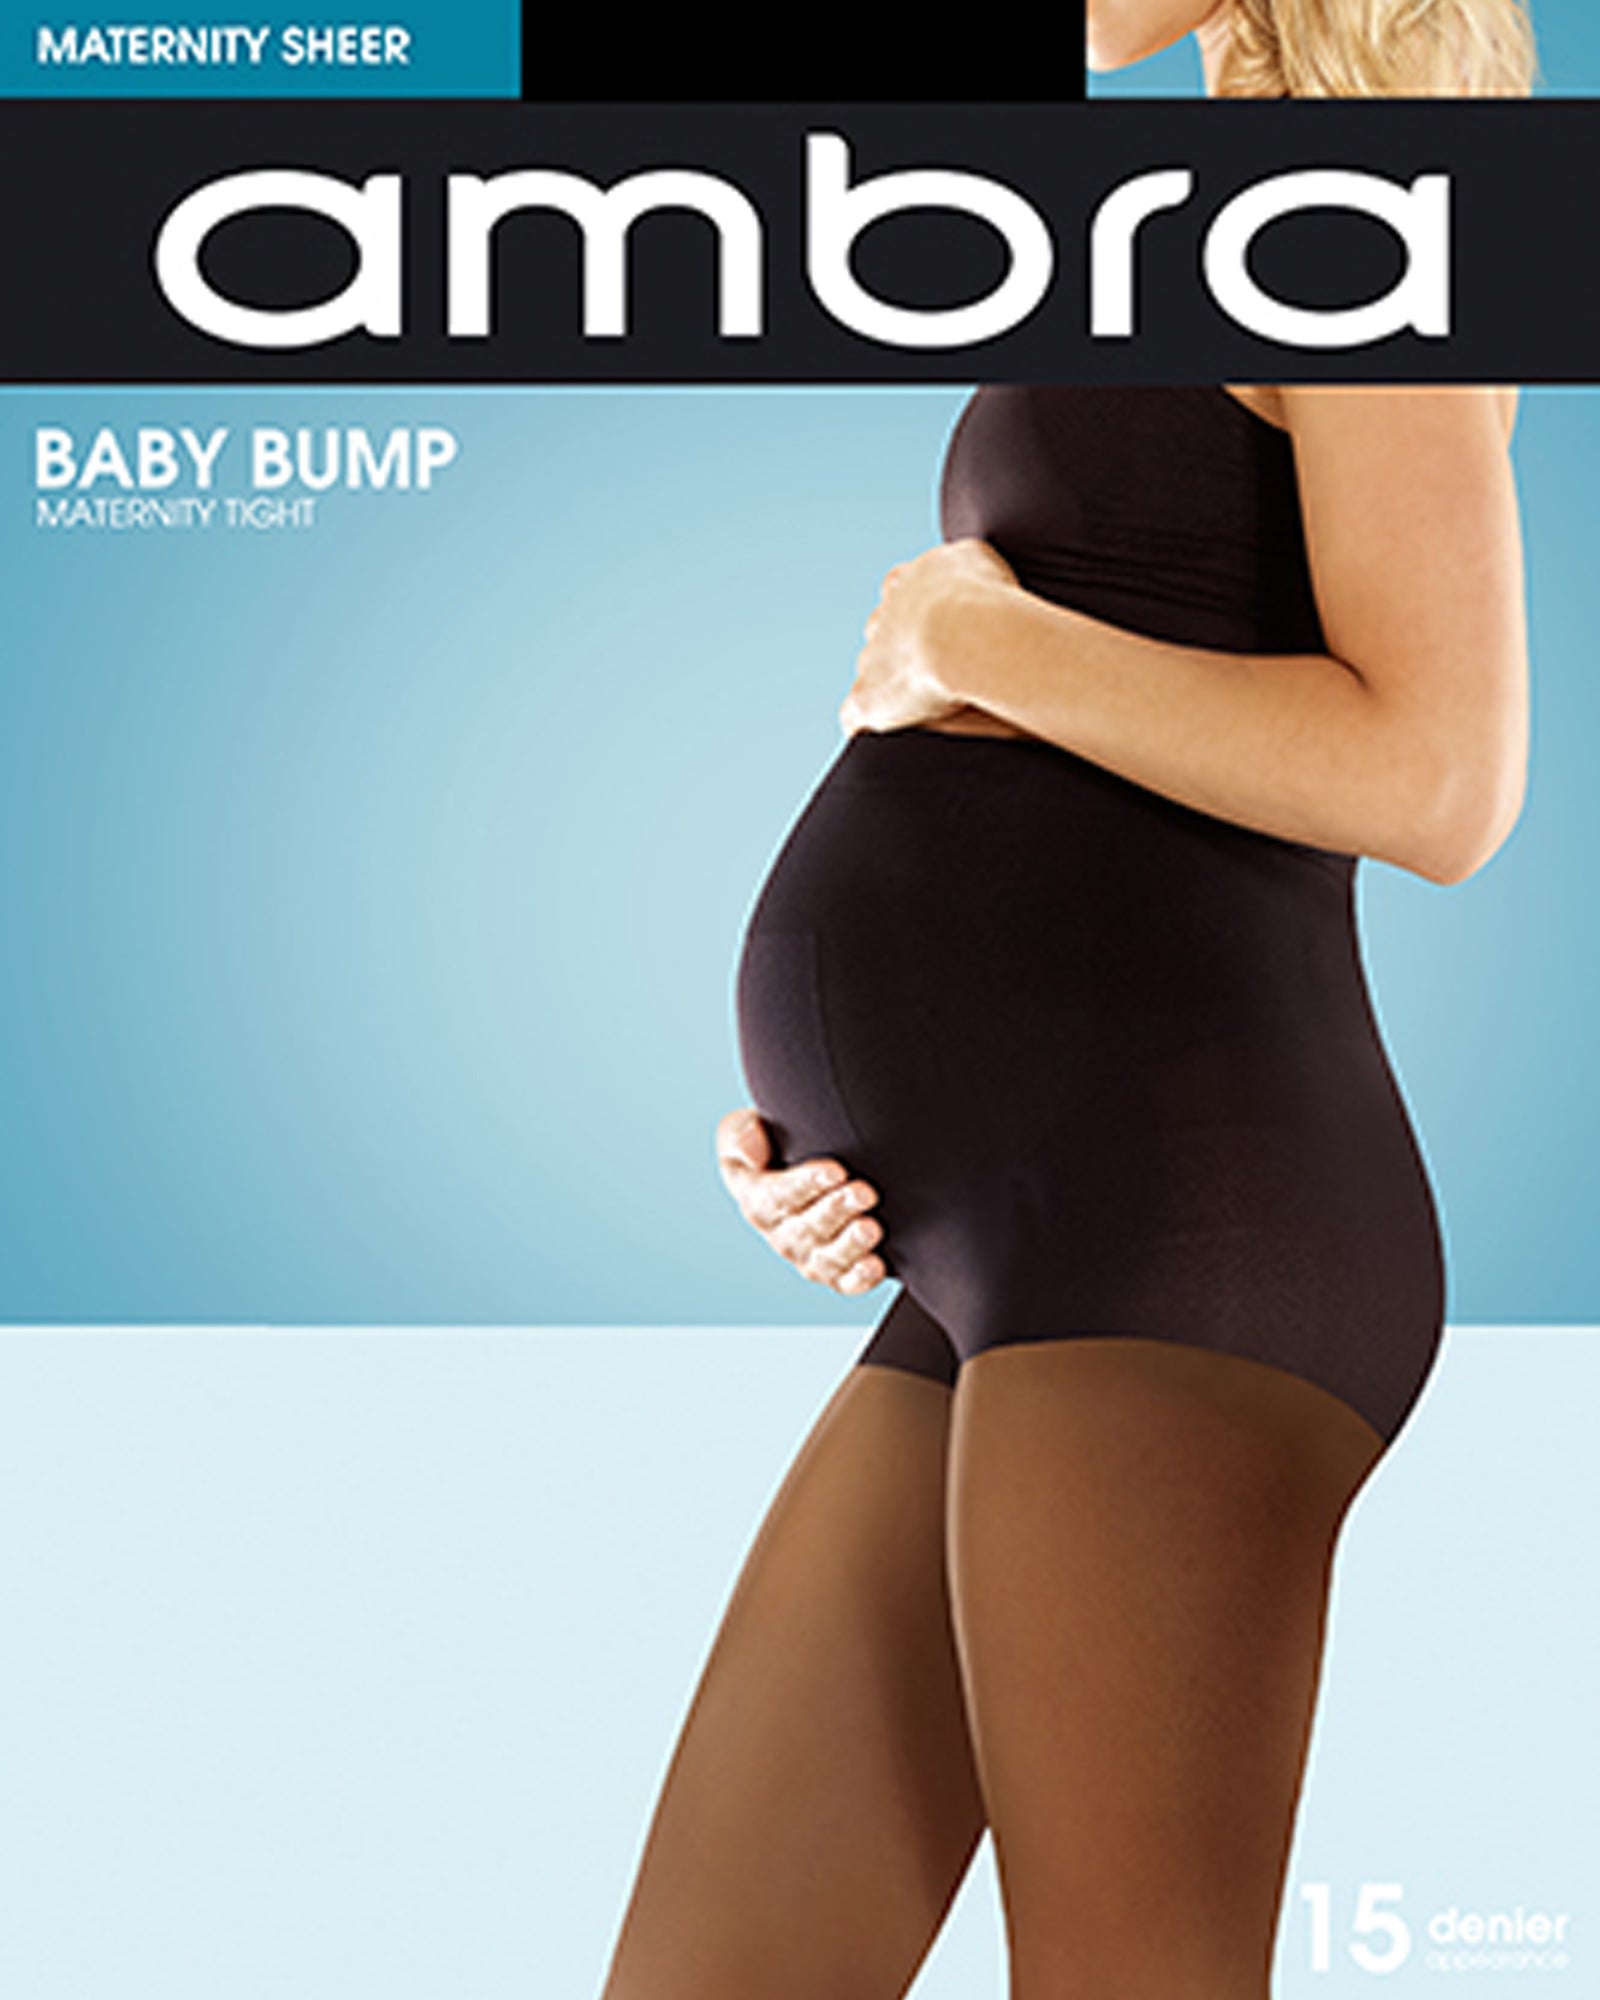 Maternity Stockings \ Maternity Tights - Opaque 70 Denier